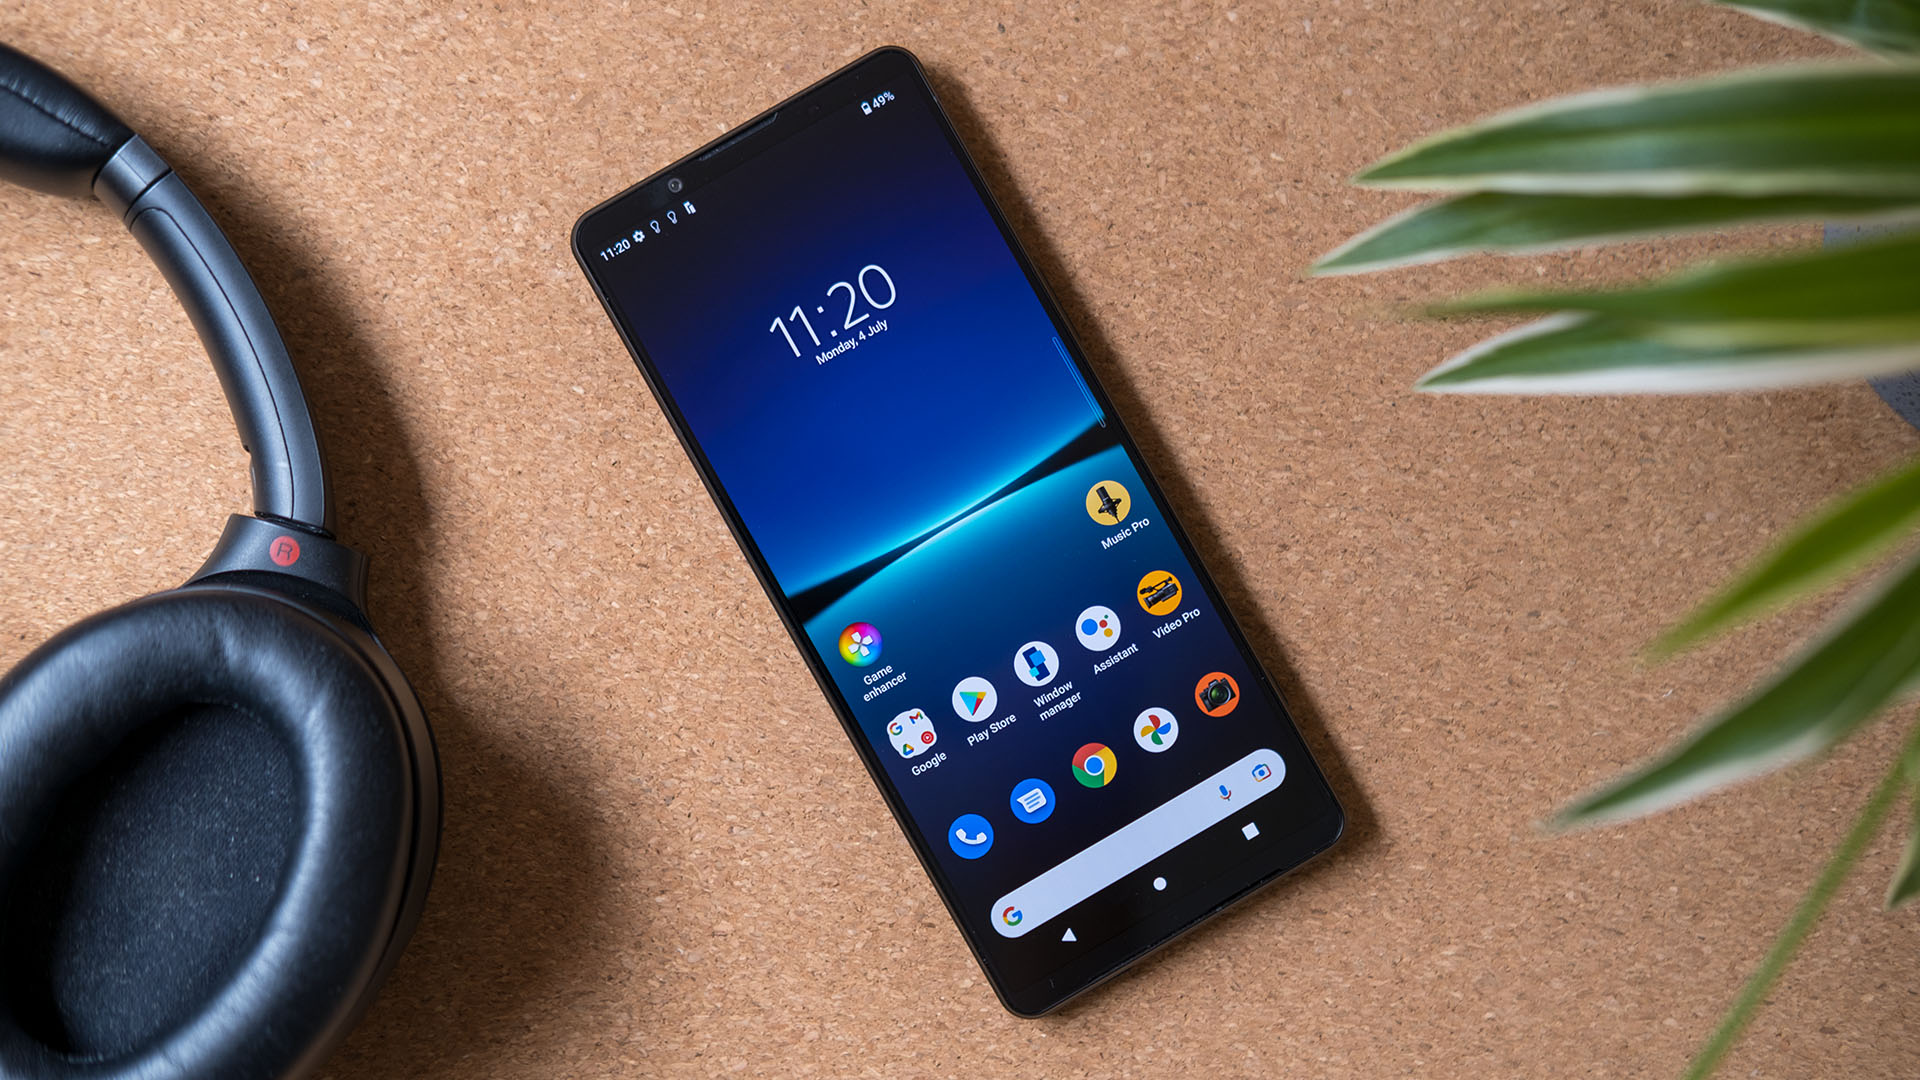 A Sony Xperia 1 IV showing its homescreen resting next to a pair of headphones and a plant.